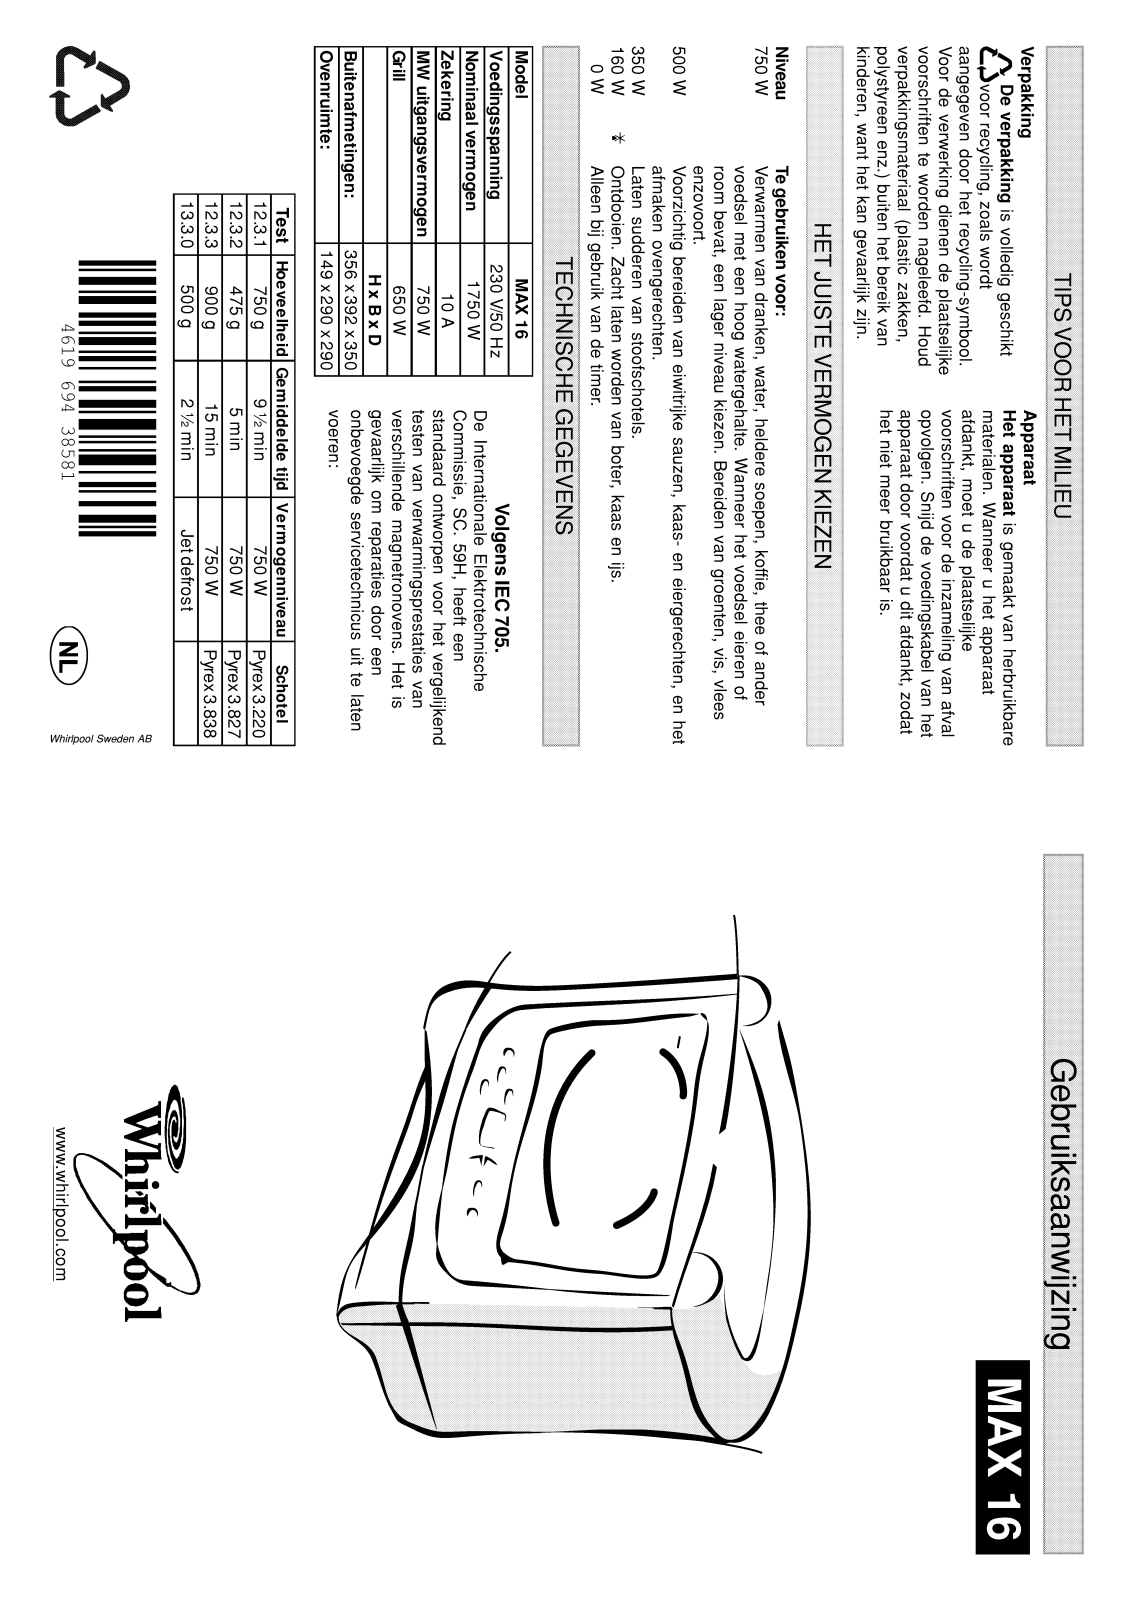 Whirlpool MAX 16/WH/2, MAX 16/WH, MAX 16/2/BL, MAX 16/BL INSTRUCTION FOR USE